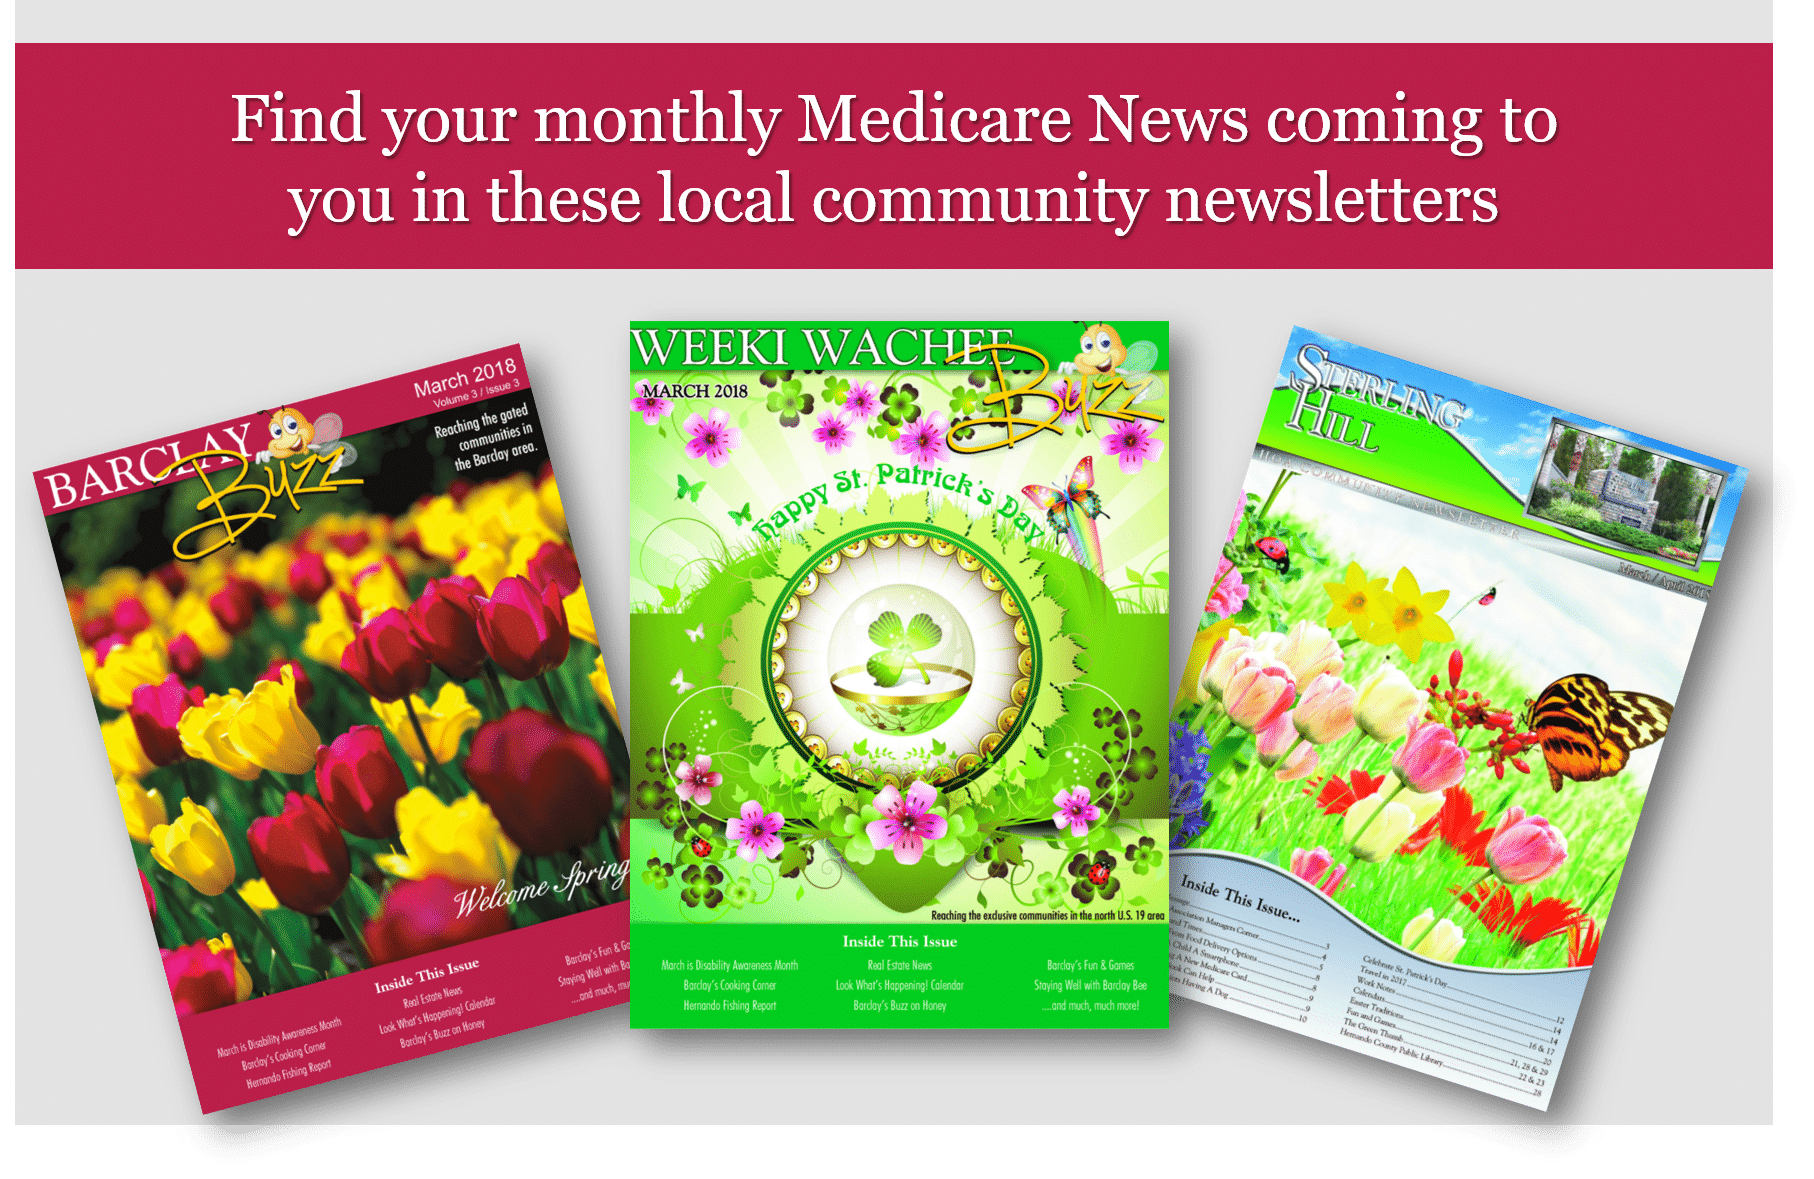 Find Your Monthly Medicare News & Community Events Coming To You In These Local Newsletters